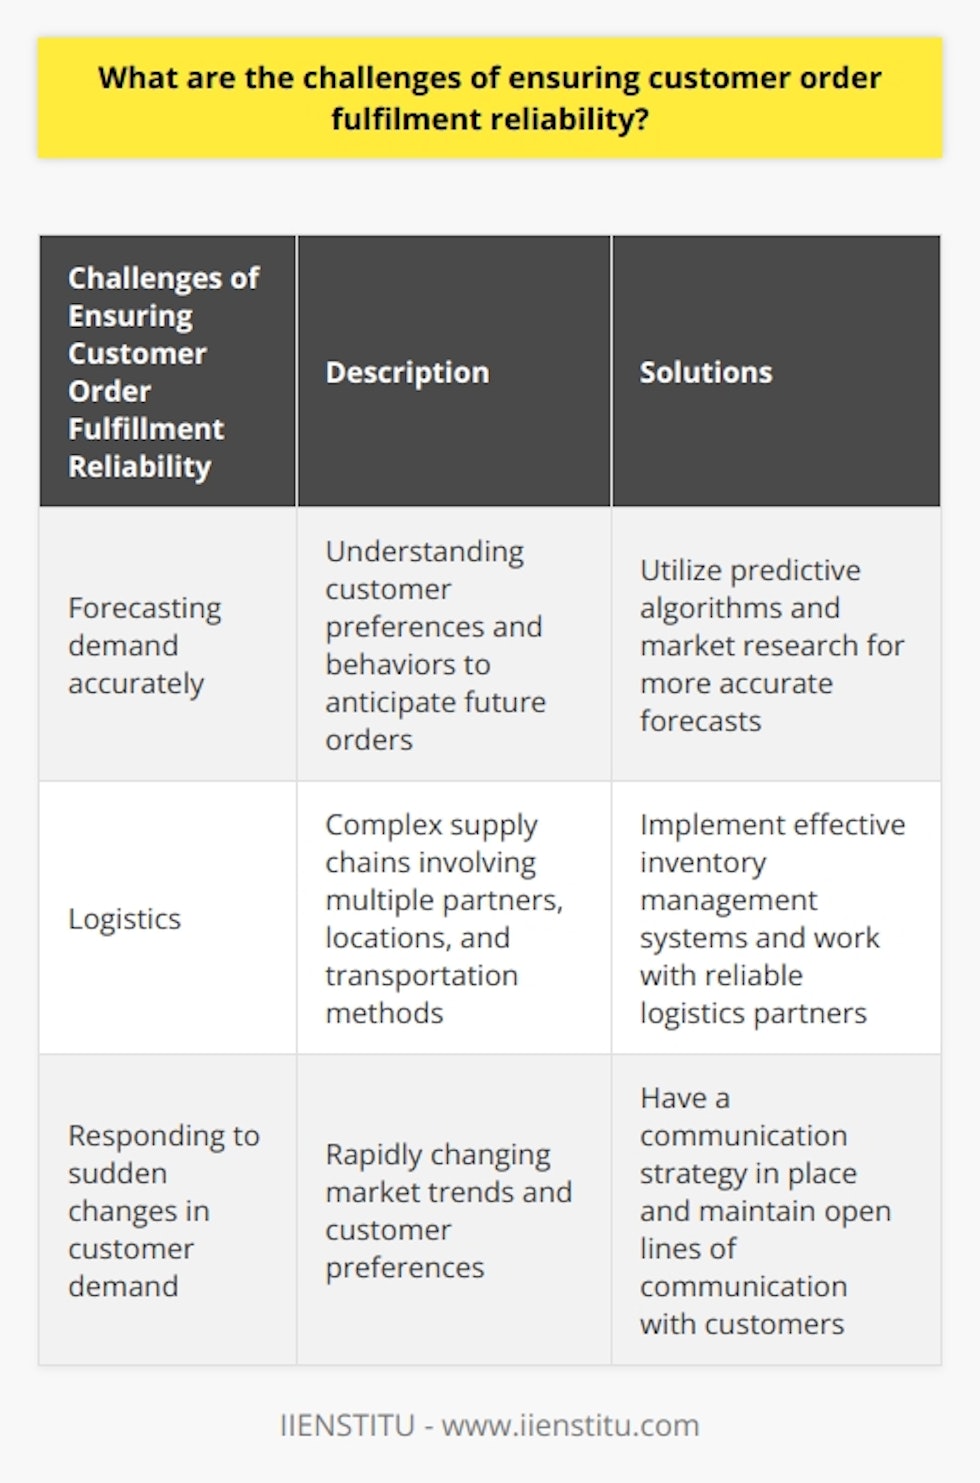 Ensuring customer order fulfillment reliability is crucial for any company that wants to build trust and loyalty with their customers. However, there are several challenges that companies need to overcome in order to achieve this goal.One of the main challenges is forecasting demand accurately. Companies need to have a clear understanding of customer preferences and behaviors in order to anticipate their future orders. Overestimating demand can lead to excess inventory and financial losses, while underestimating demand can result in stockouts and dissatisfied customers. To overcome this challenge, companies can utilize predictive algorithms and market research to gain insights into customer demand patterns and make more accurate forecasts.Logistics is another challenge that can affect order fulfillment reliability. Companies often have complex supply chains that involve multiple partners, locations, and transportation methods. Ensuring that goods are delivered to customers on time and in good condition can be challenging. However, companies can address this challenge by implementing effective inventory management systems and working with reliable logistics partners. By having real-time visibility into inventory levels and optimizing the movement of goods, companies can improve their delivery performance and enhance customer satisfaction.Another challenge that companies face is responding to sudden changes in customer demand. Market trends and customer preferences can change rapidly, and companies need to be agile and adaptable to meet these evolving demands. Having a communication strategy in place can help bridge the gap between customer demand and fulfillment. By staying informed about market trends and maintaining open lines of communication with customers, companies can quickly adjust their production and delivery systems to meet changing demand.In conclusion, ensuring customer order fulfillment reliability requires companies to overcome various challenges, including accurate demand forecasting, efficient logistics management, and responsiveness to changing customer demands. By addressing these challenges, companies can provide consistent and reliable service to their customers, build trust and loyalty, and ultimately achieve business success.